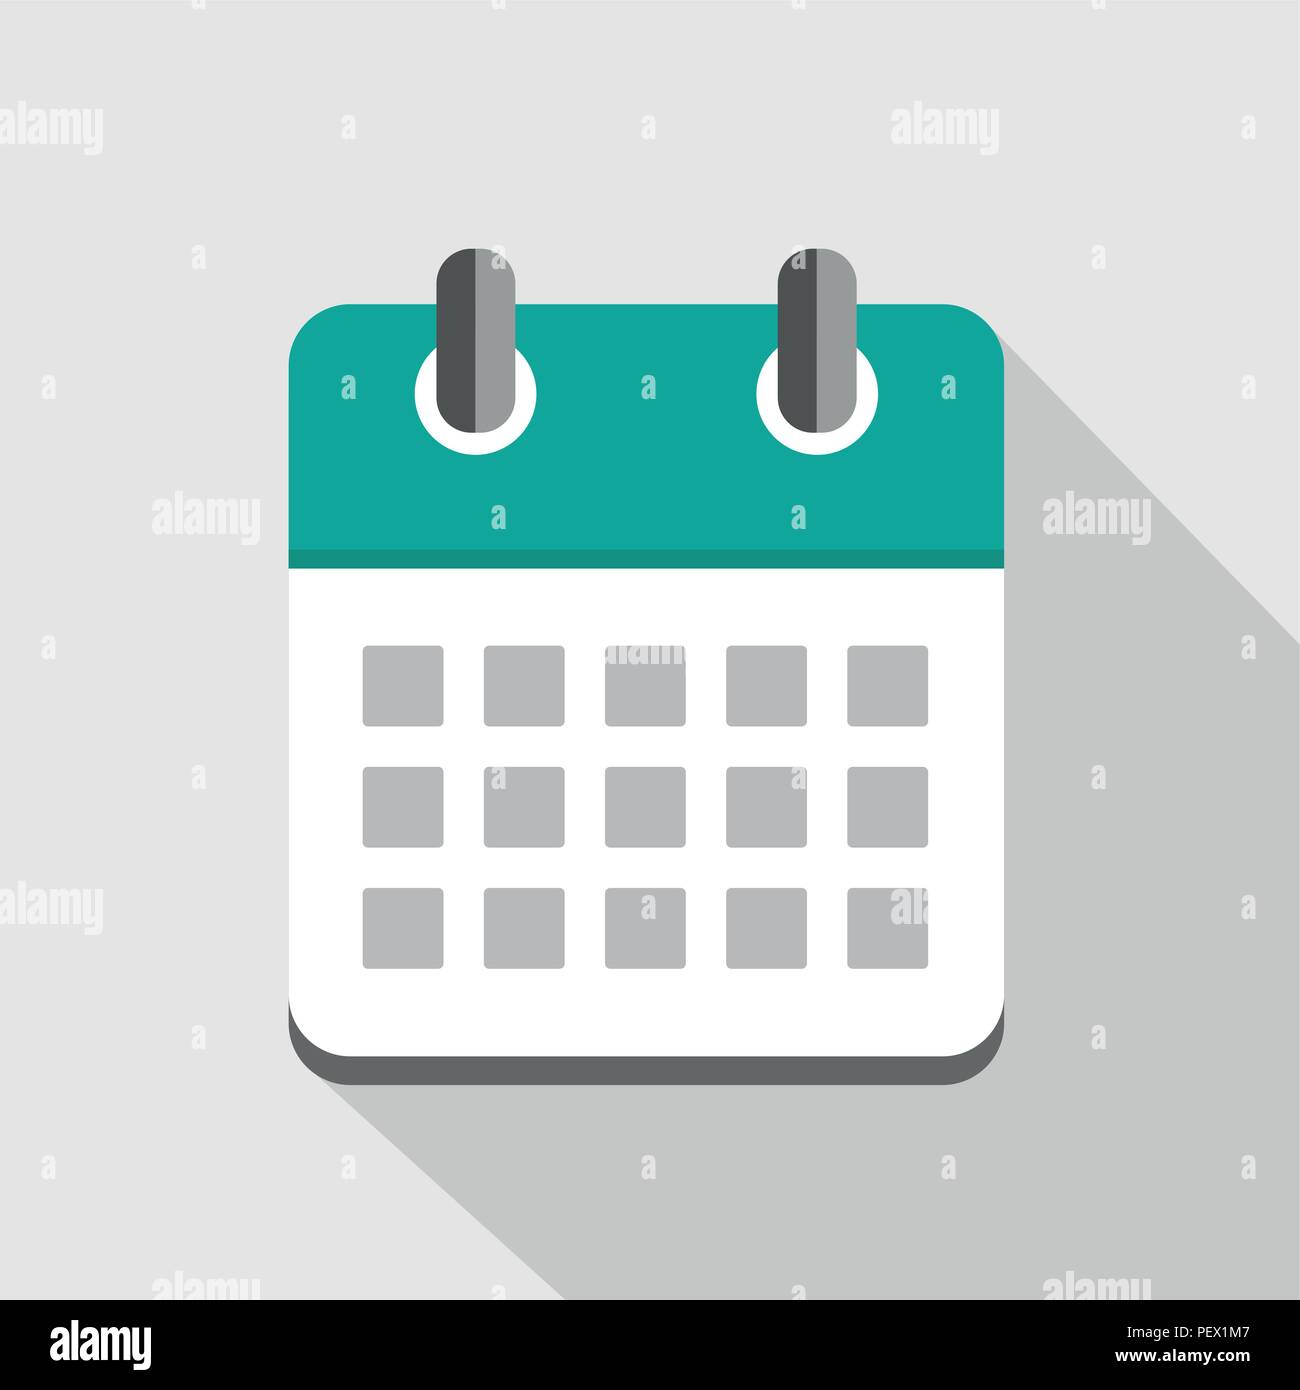 Turquoise Calendar Icon Business Vector Illustration Eps10 Stock Vector Image Art Alamy Icons for slides & docs+2.5 million of free customizable icons for your slides, docs and sheets. https www alamy com turquoise calendar icon business vector illustration eps10 image215701703 html